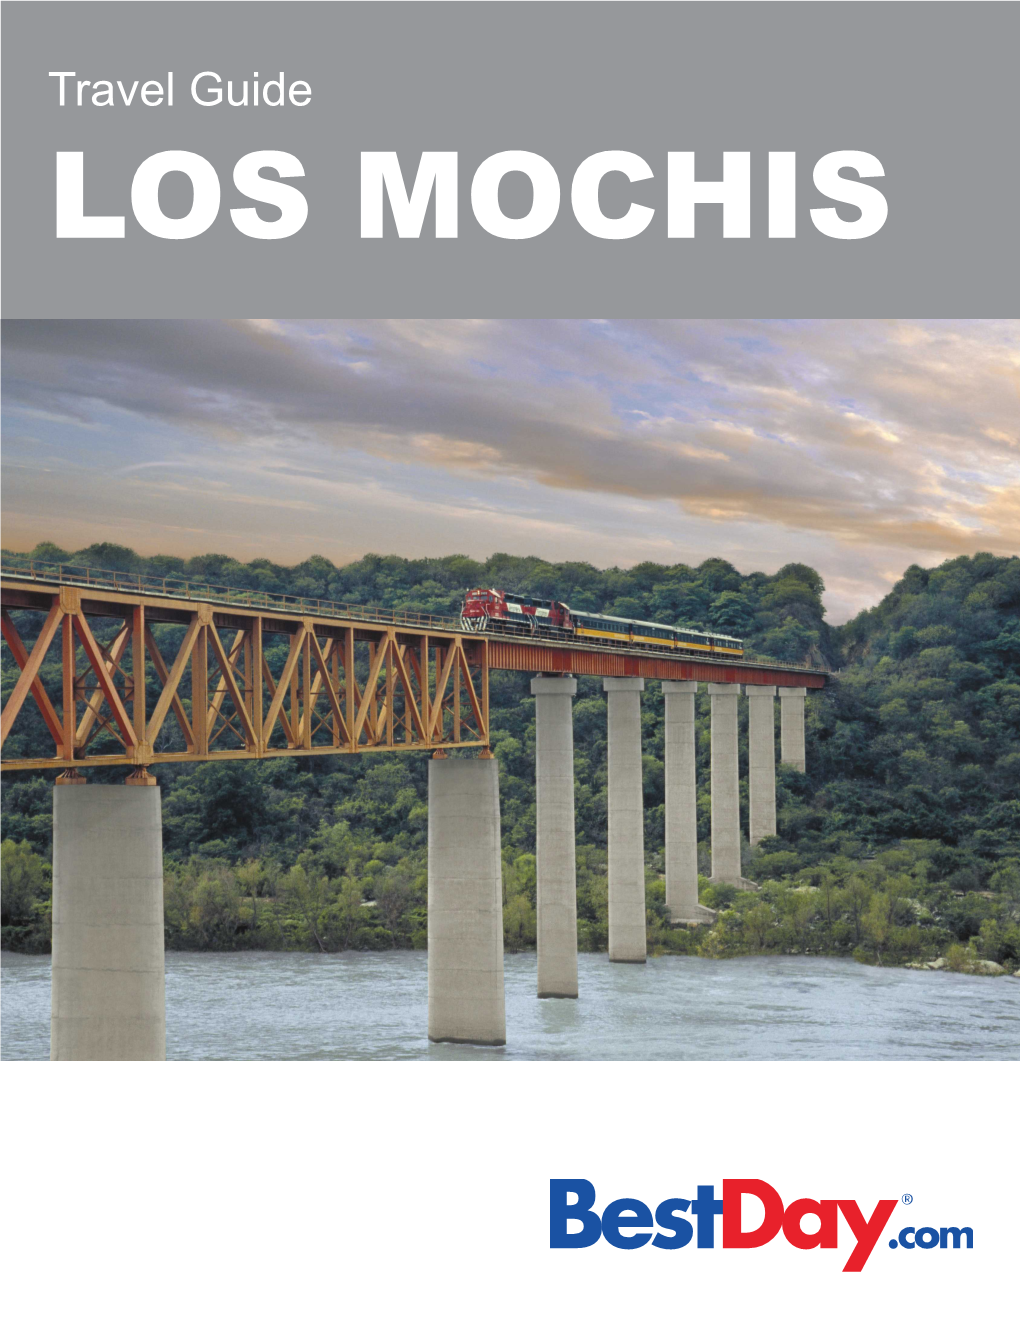 Travel Guide LOS MOCHIS Contents